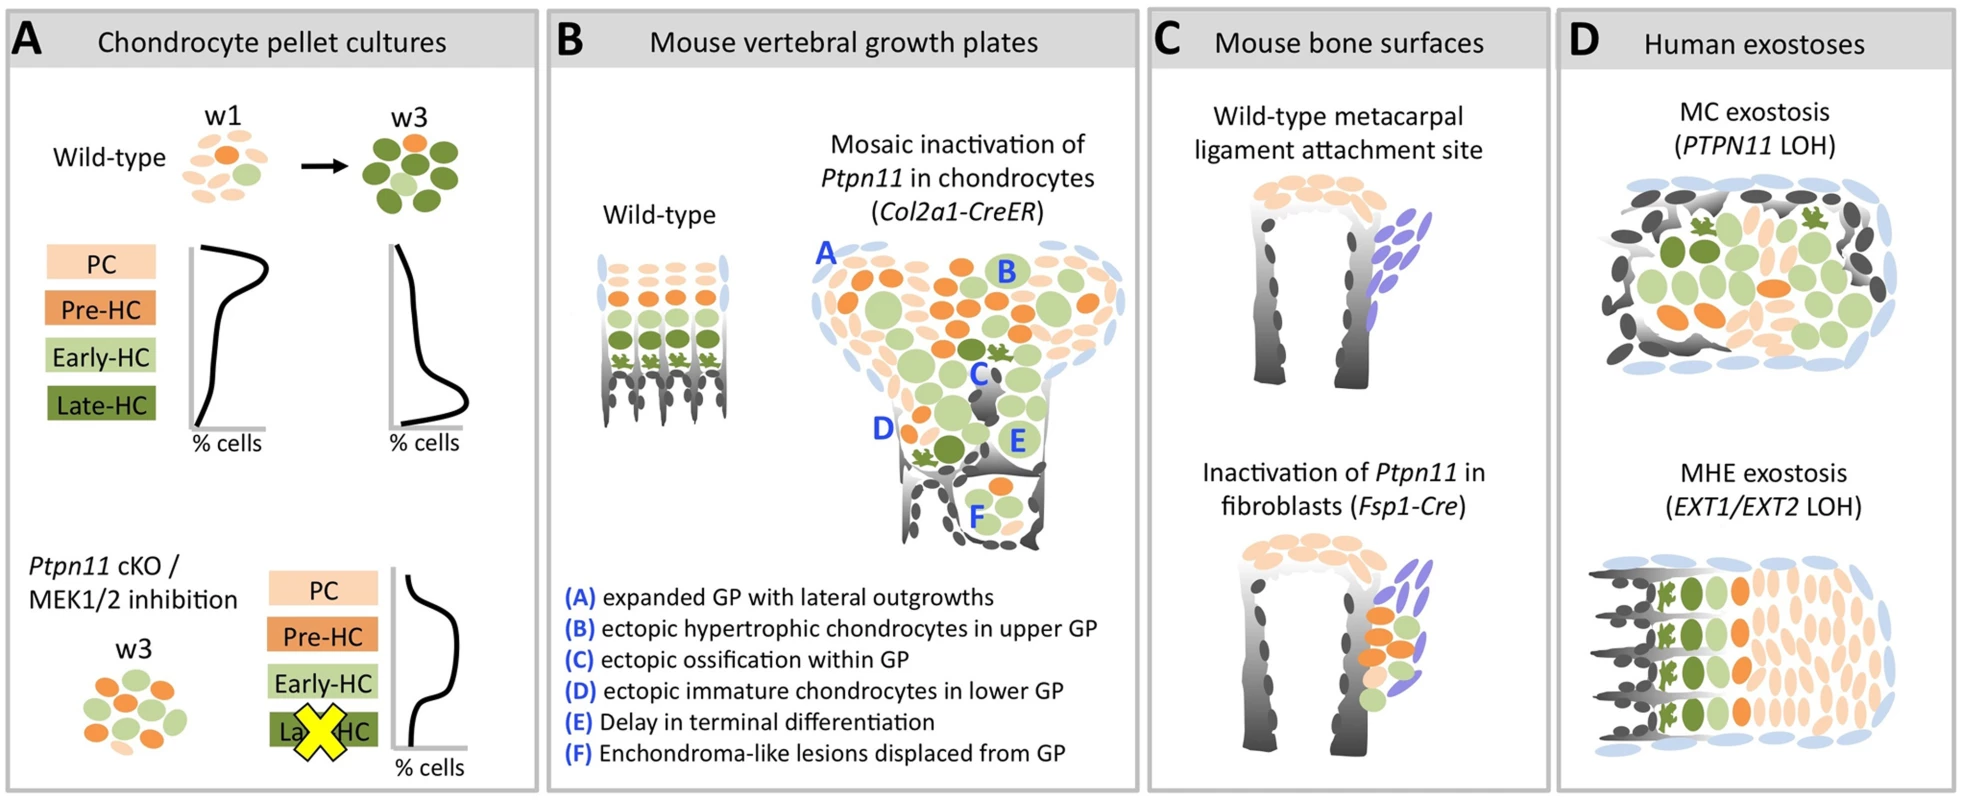 Model of the consequences of SHP2 depletion in pellet cultures, mouse vertebral growth plates, periarticular fibroblasts and human MC exostoses.